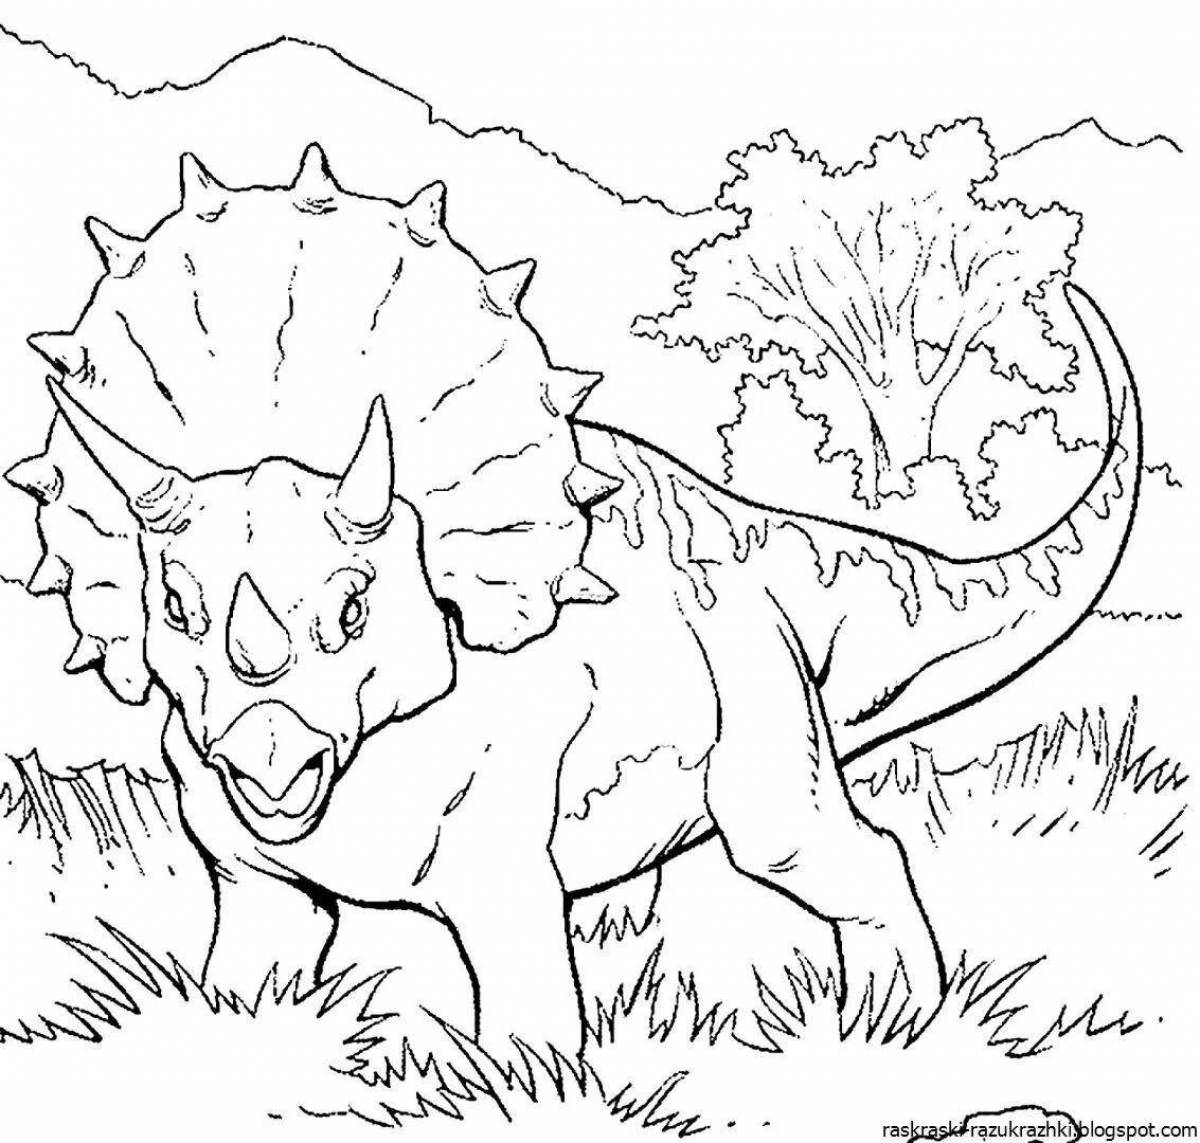 Amazing dinosaurs coloring book for 7-8 year olds